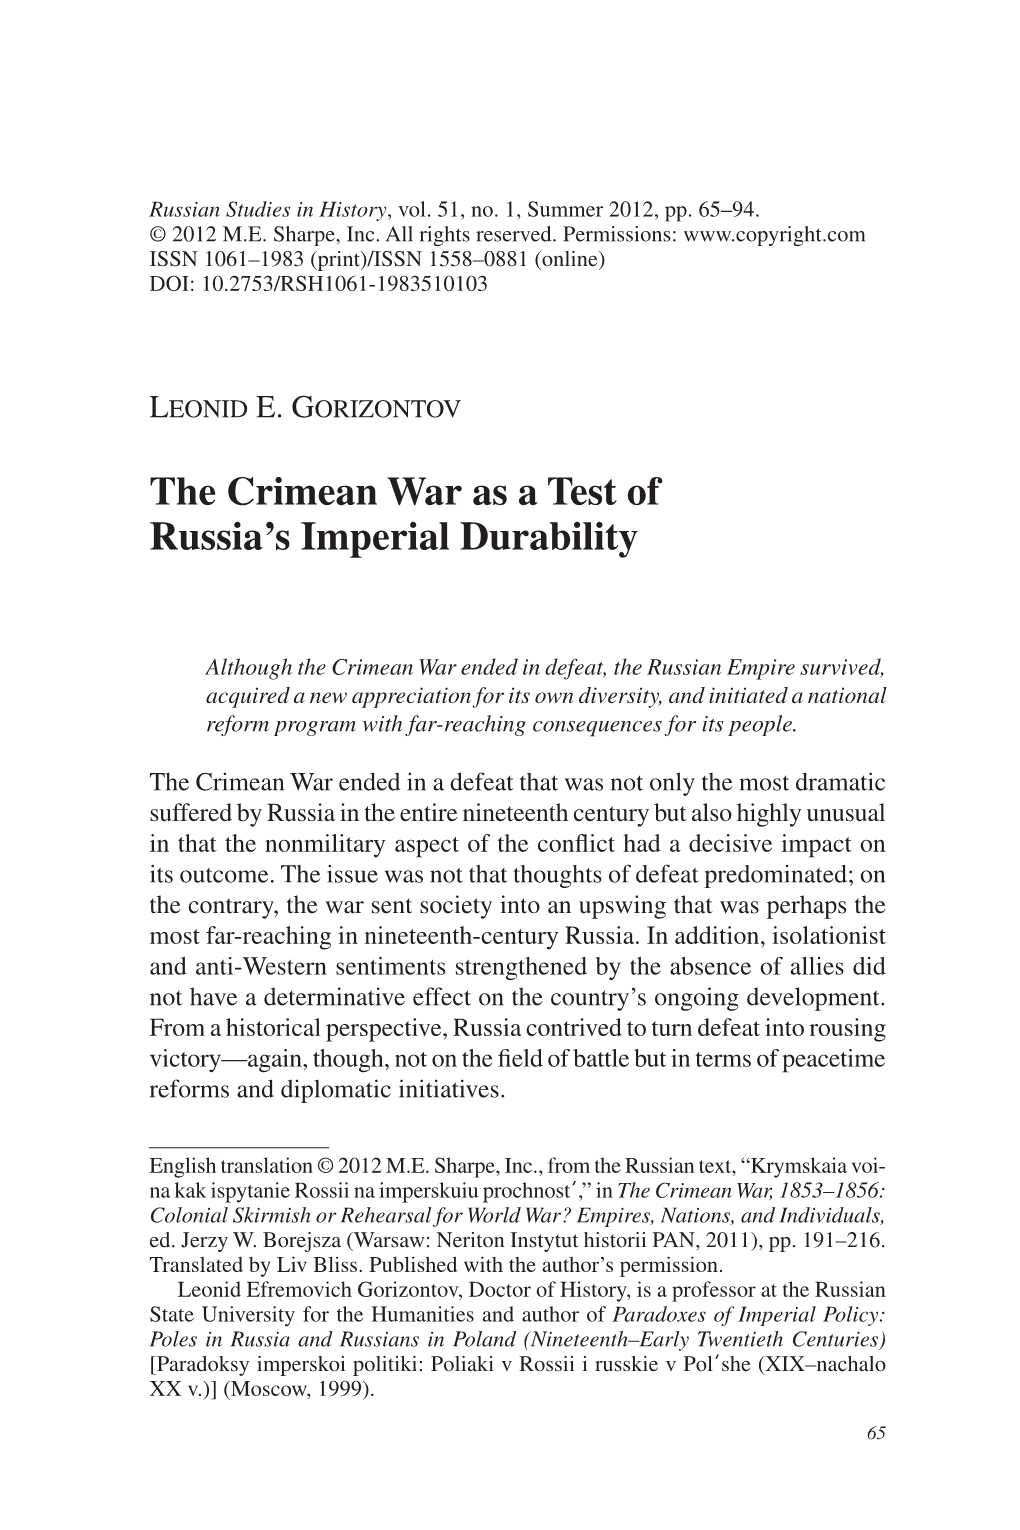 The Crimean War As a Test of Russia's Imperial Durability